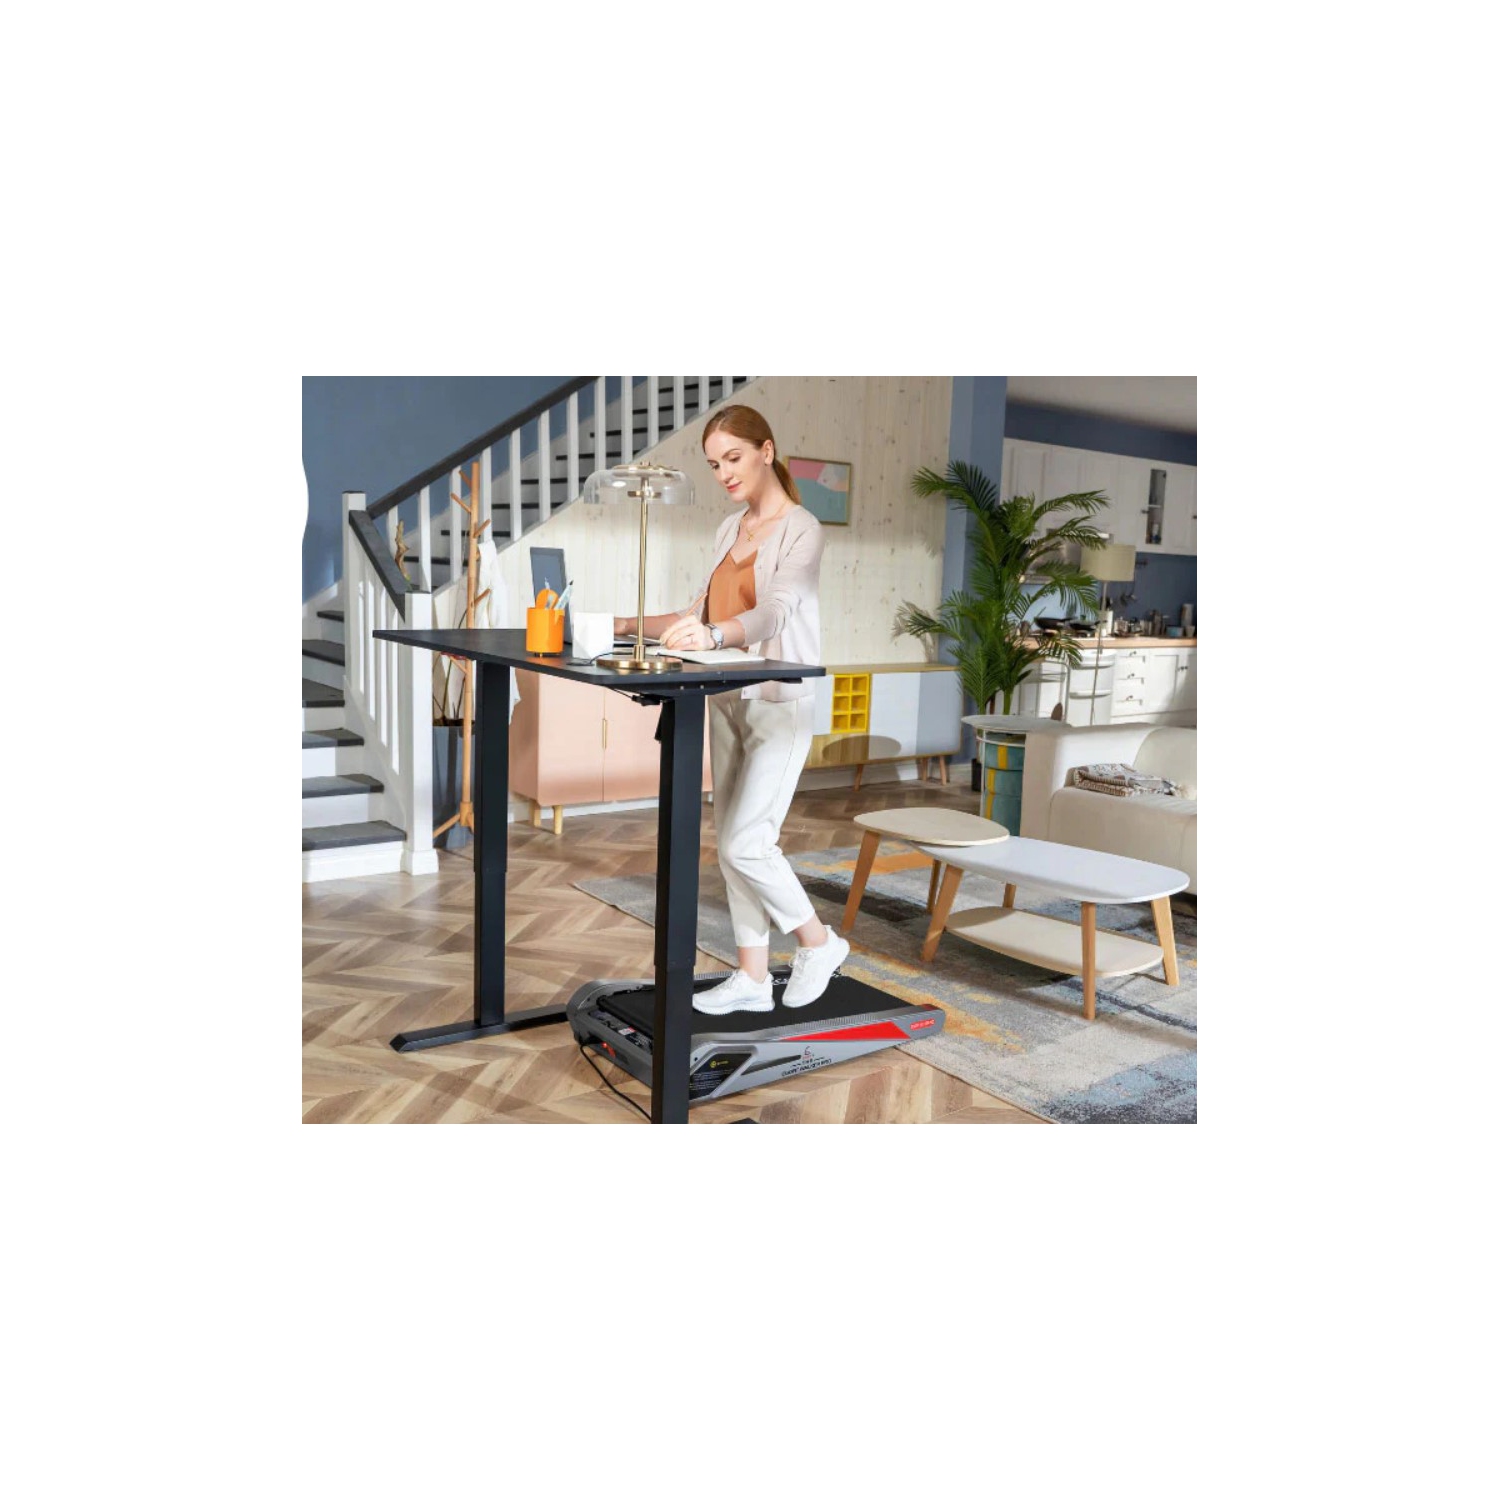 Egofit Walker Pro 2023 Motorized Treadmill with APP and Remote Control